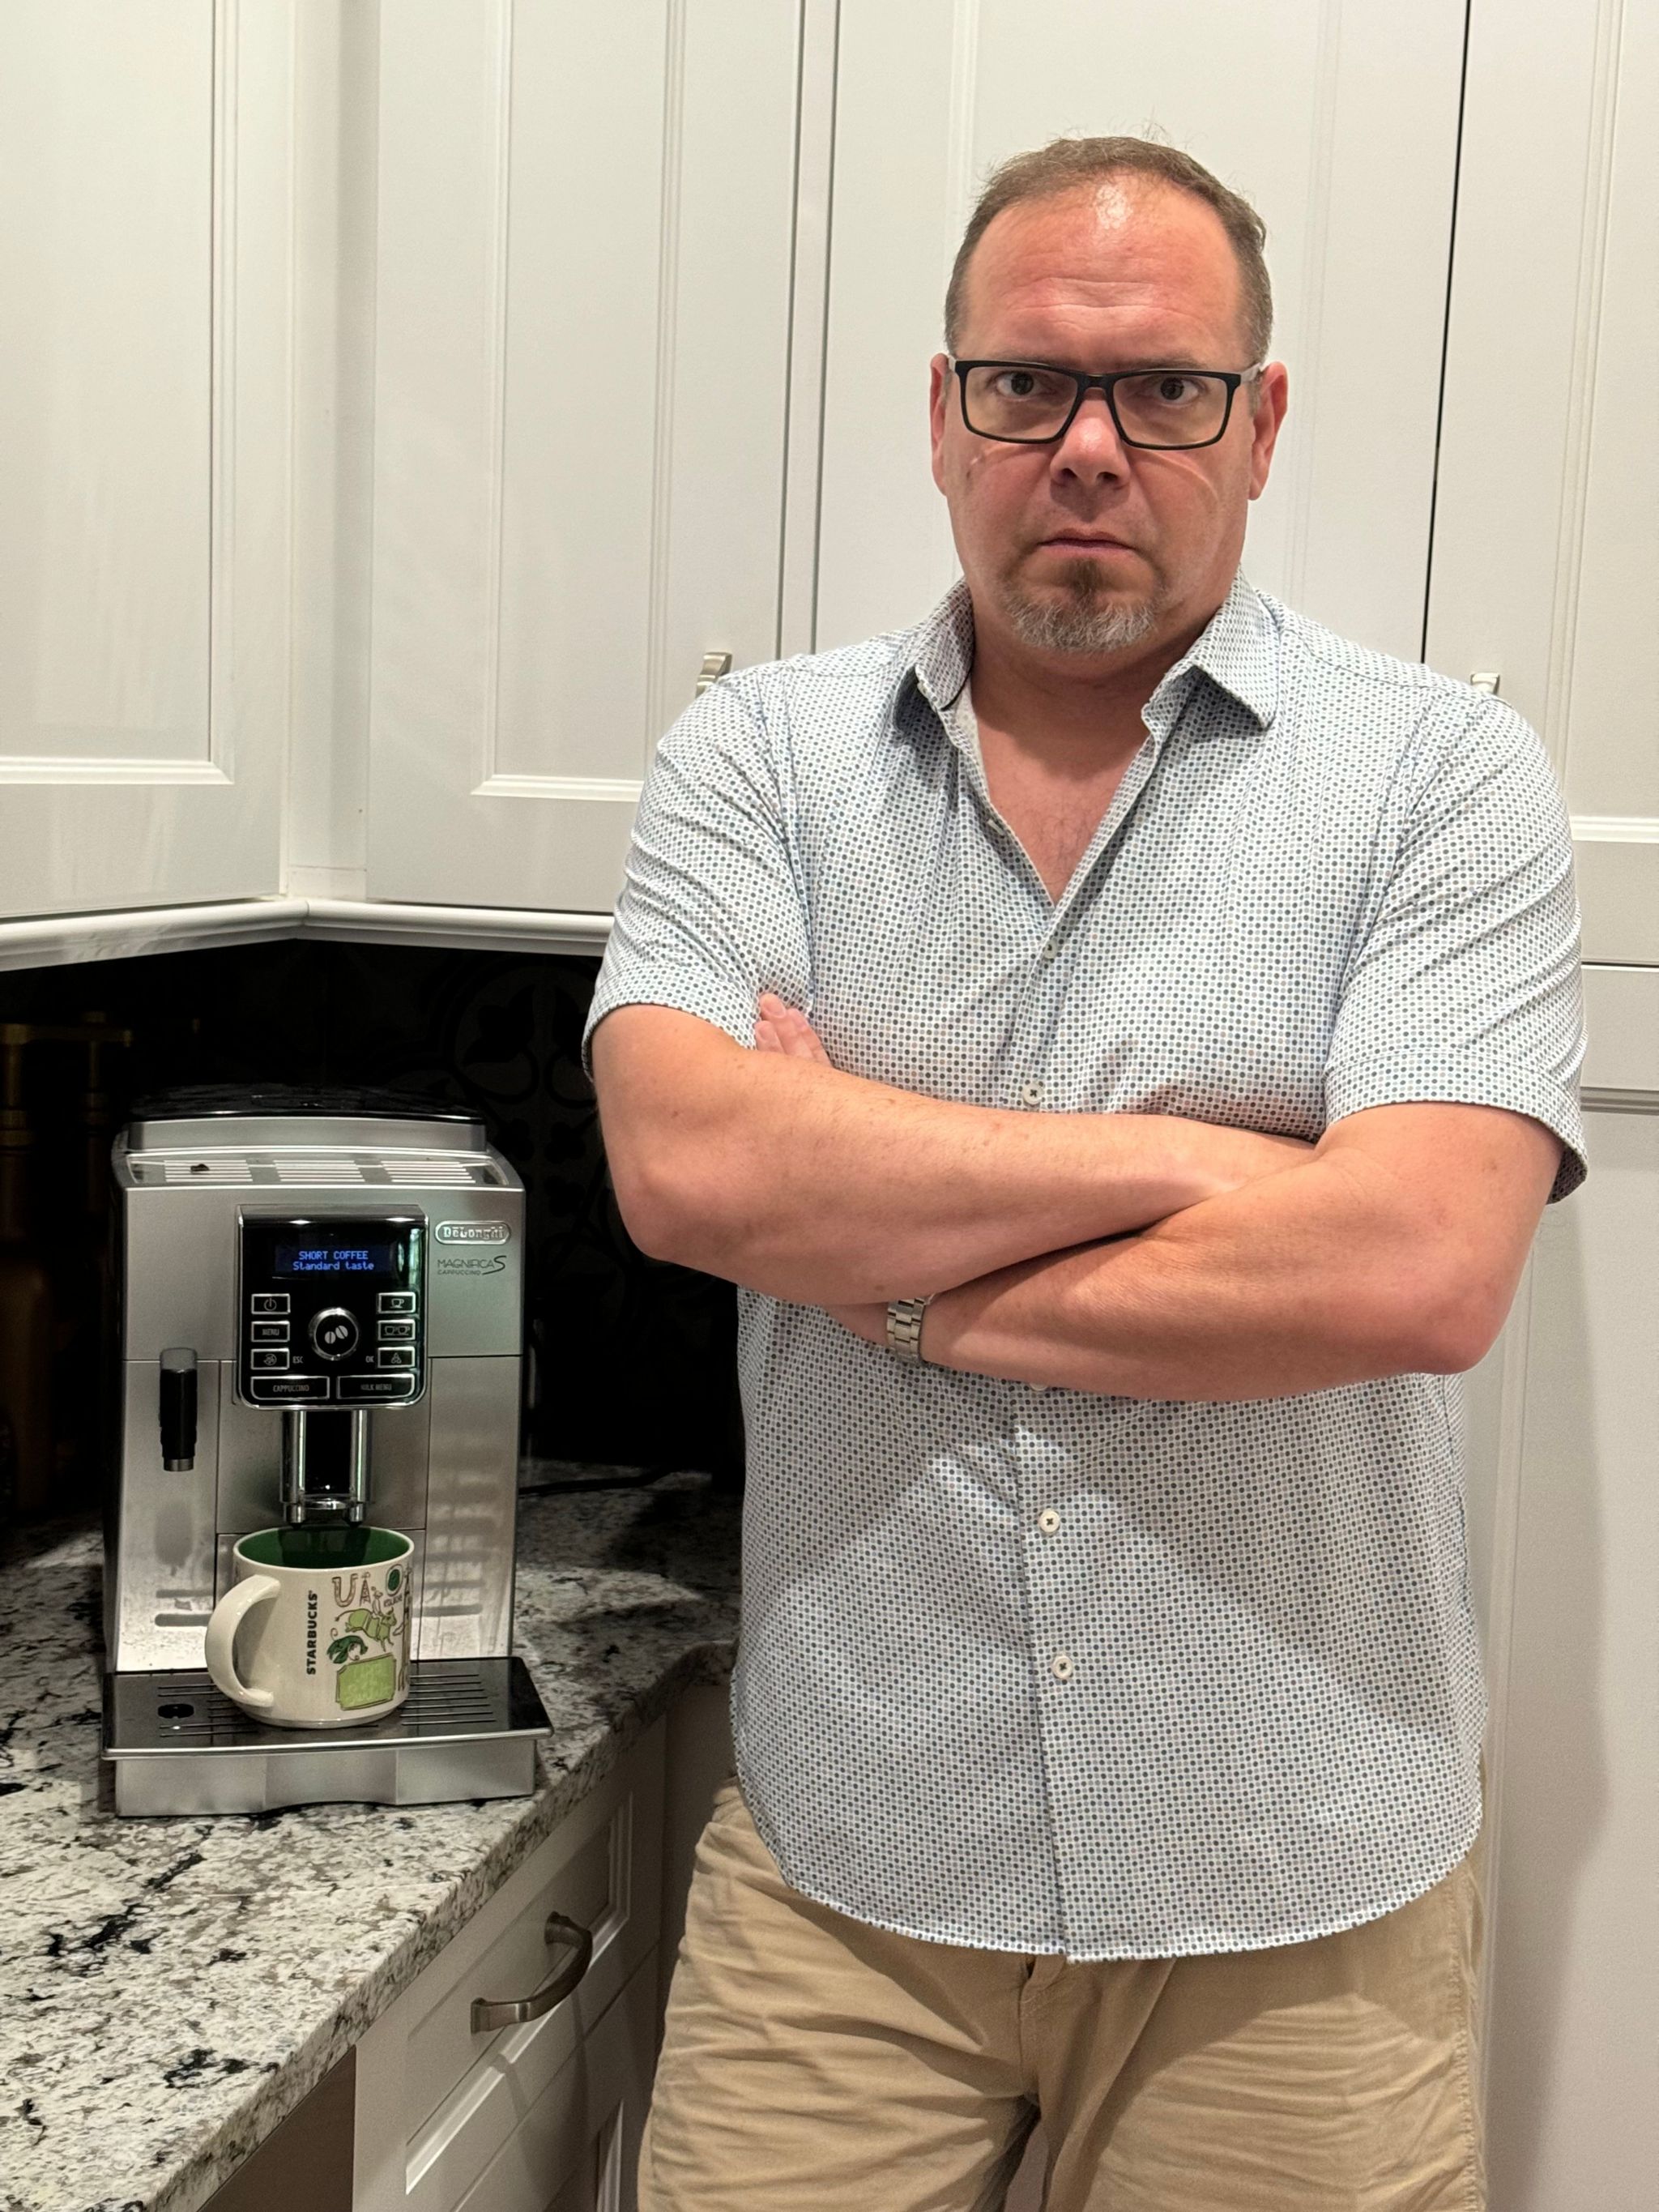 Andrew Buckley standing with arms crossed in his kitchen next to his coffee machine